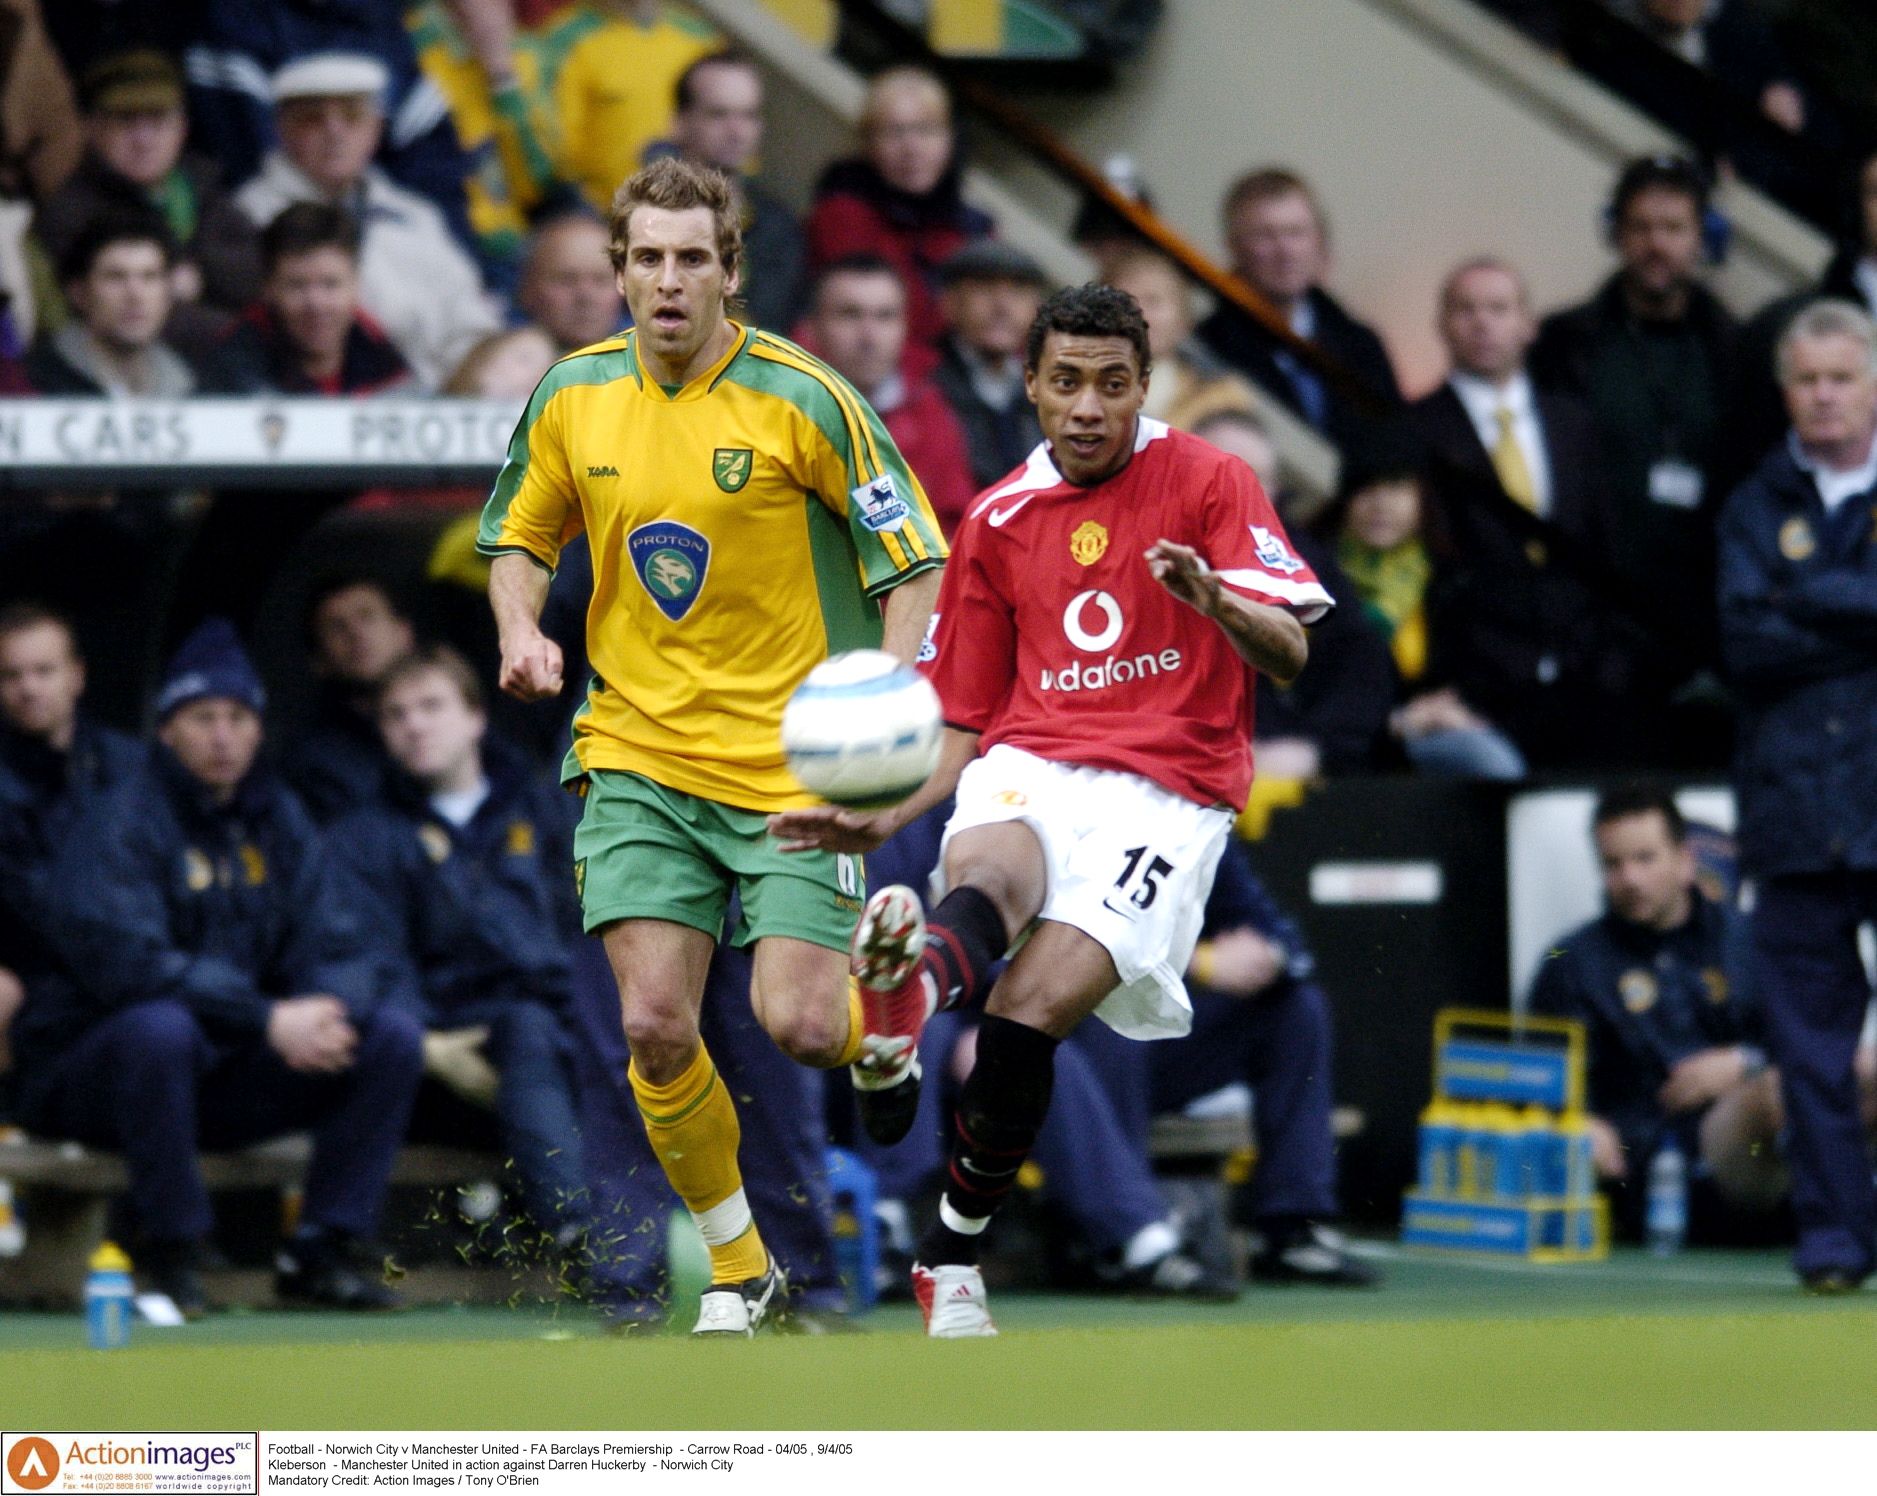 Football - Norwich City v Manchester United - FA Barclays Premiership  - Carrow Road - 04/05 , 9/4/05 
Kleberson  - Manchester United in action against Darren Huckerby  - Norwich City 
Mandatory Credit: Action Images / Tony O'Brien 
NO ONLINE/INTERNET USE WITHOUT A LICENCE FROM THE FOOTBALL DATA CO LTD. FOR LICENCE ENQUIRIES PLEASE TELEPHONE +44 207 298 1656.